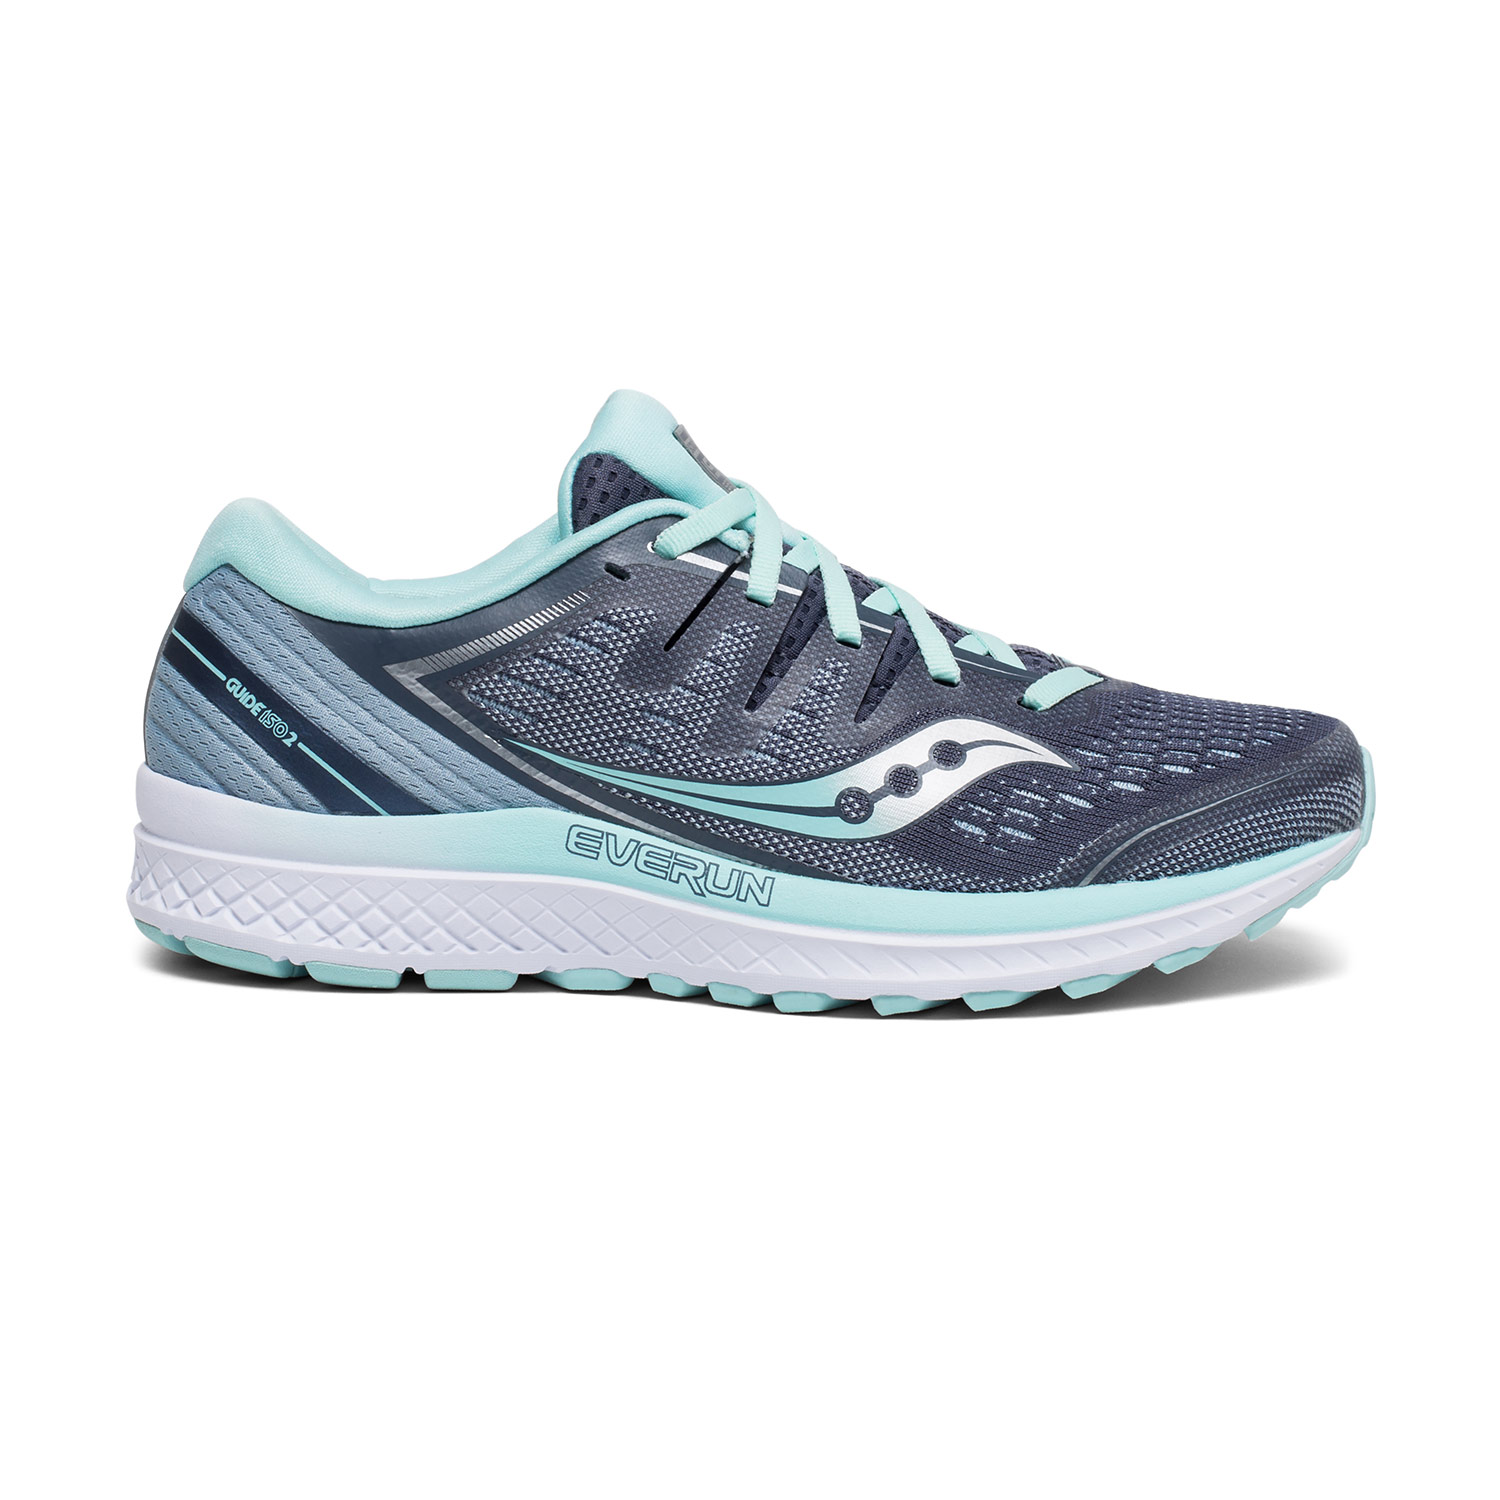 saucony guide running room